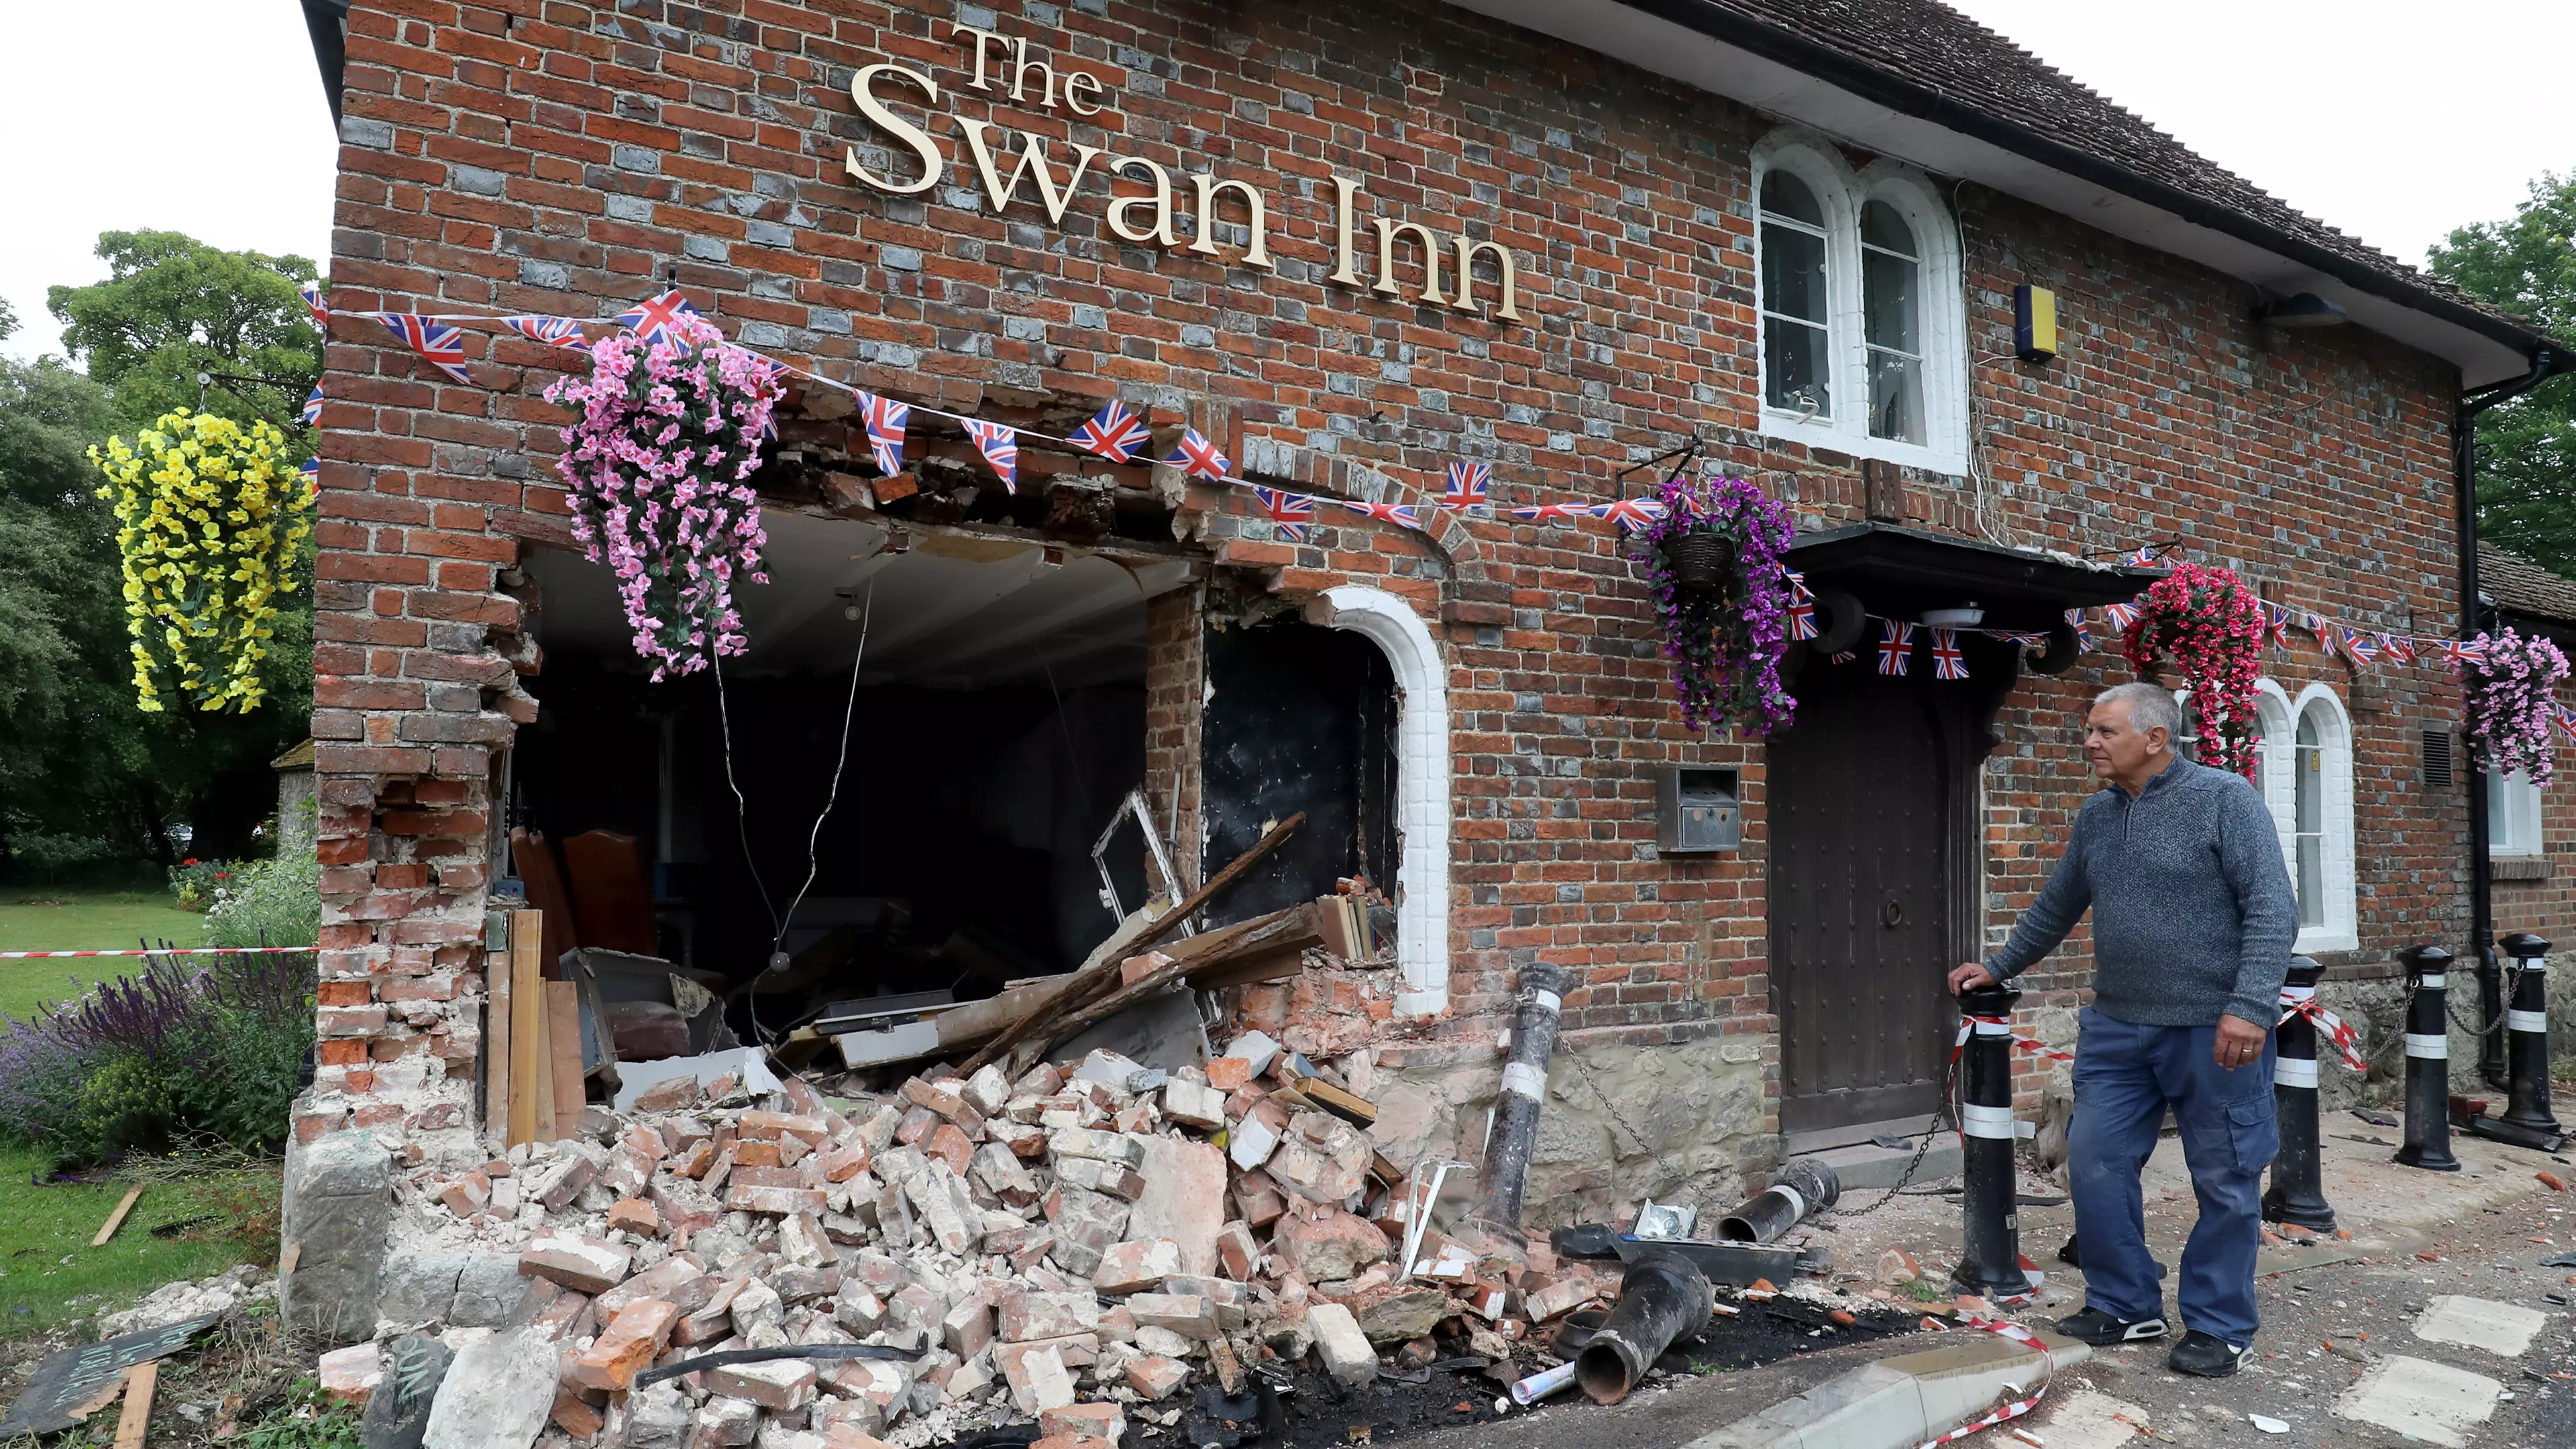 Landlord Hopes To Reopen Pub Even After It Was Destroyed By Car Overnight